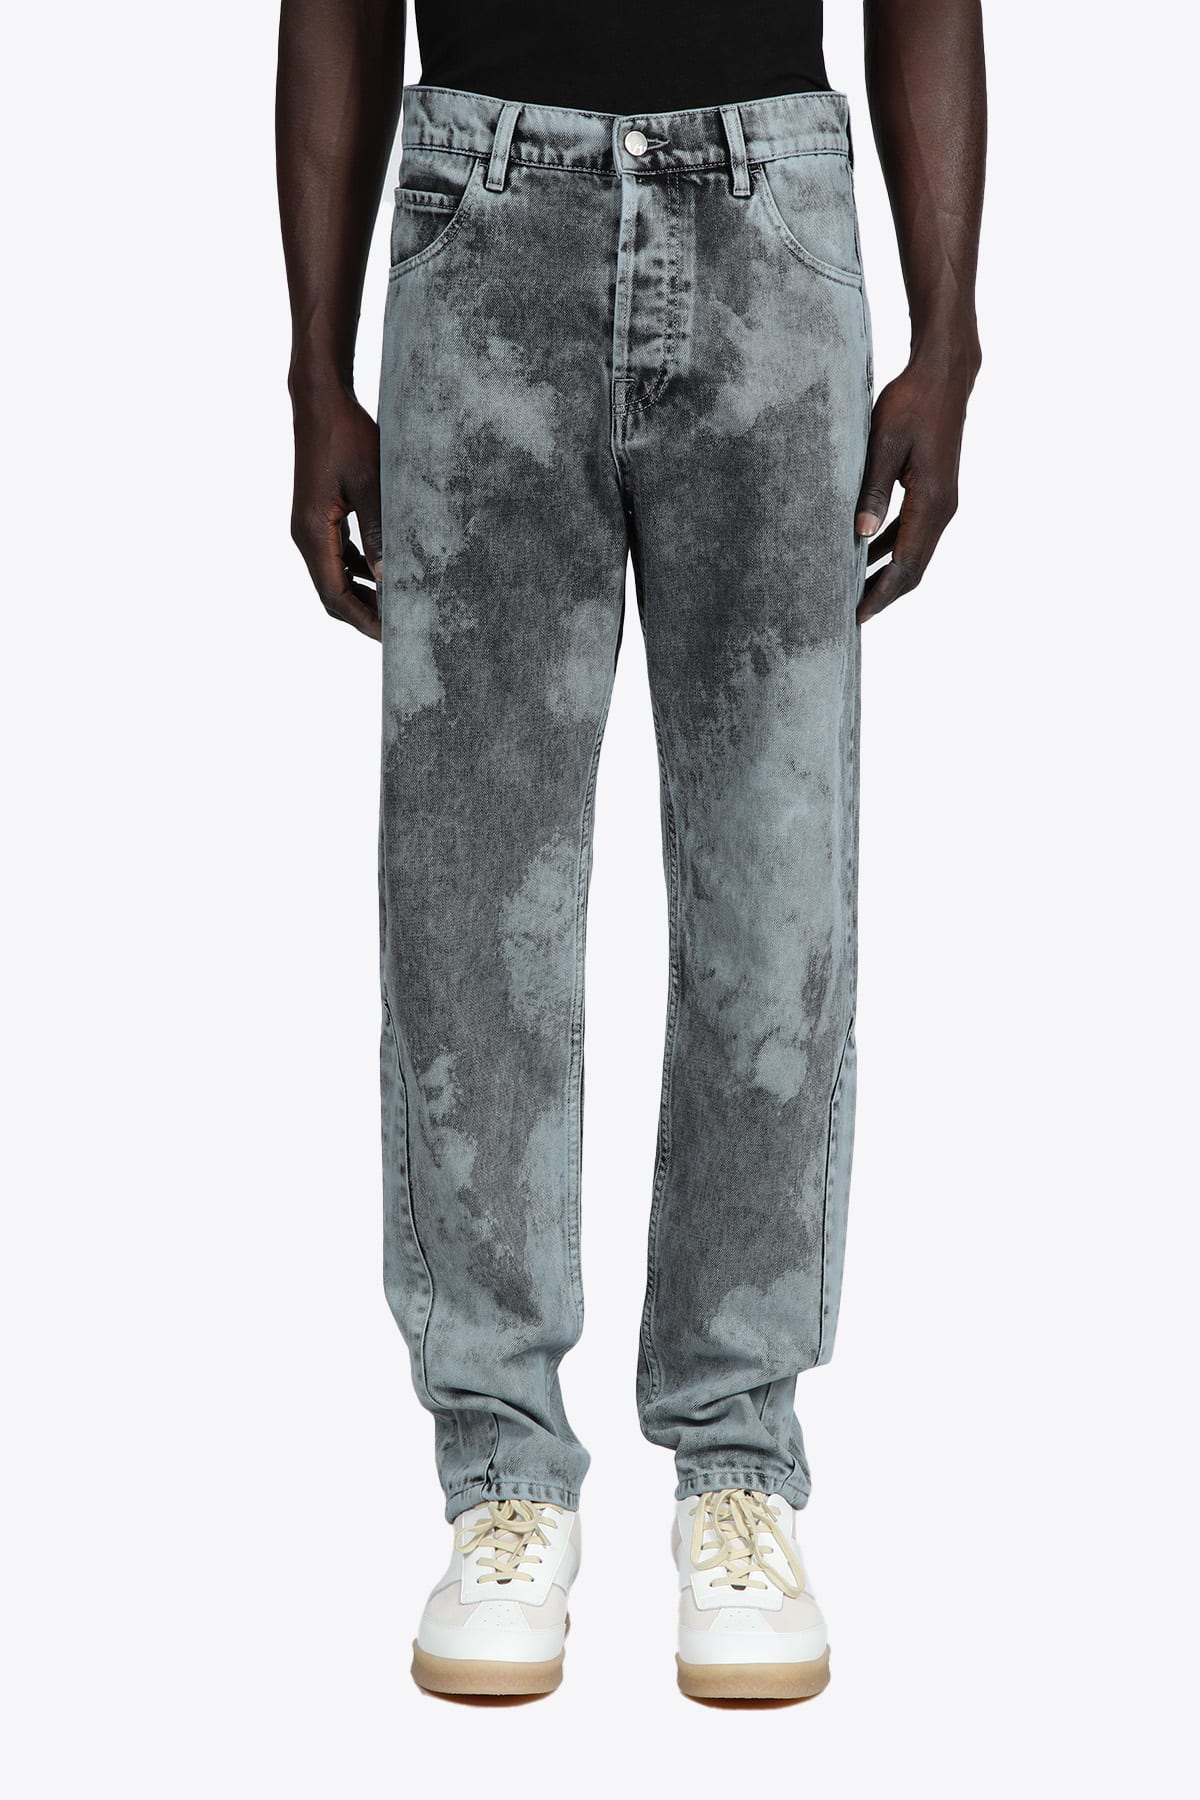 A-COLD-WALL Woven Fade Form Jean Tye-dye grey denim pant with patch logo